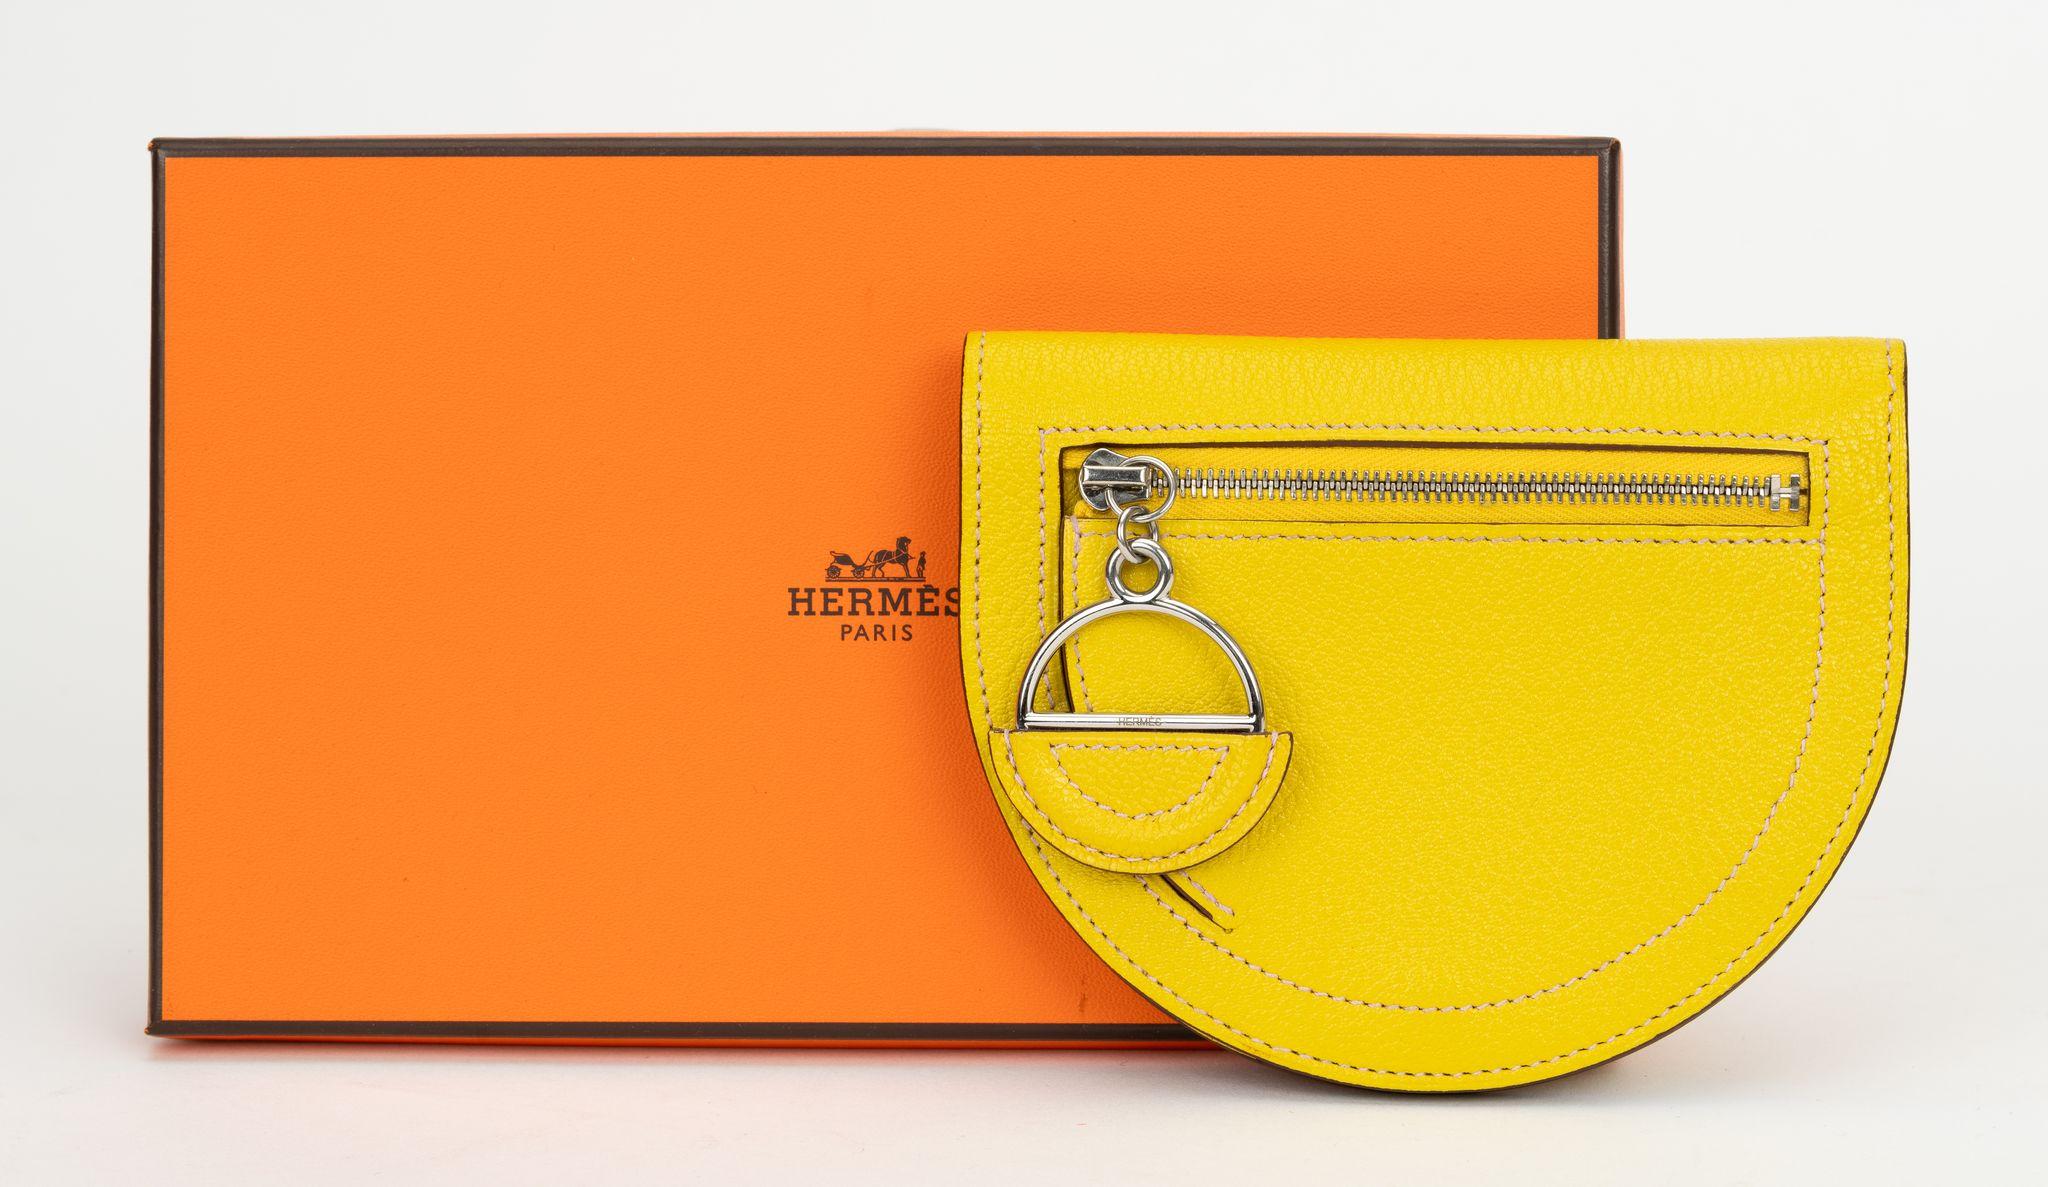 Hermès Chevre Mysore In-The-Loop Compact Wallet in lime yellow and White. Brand new with original box.